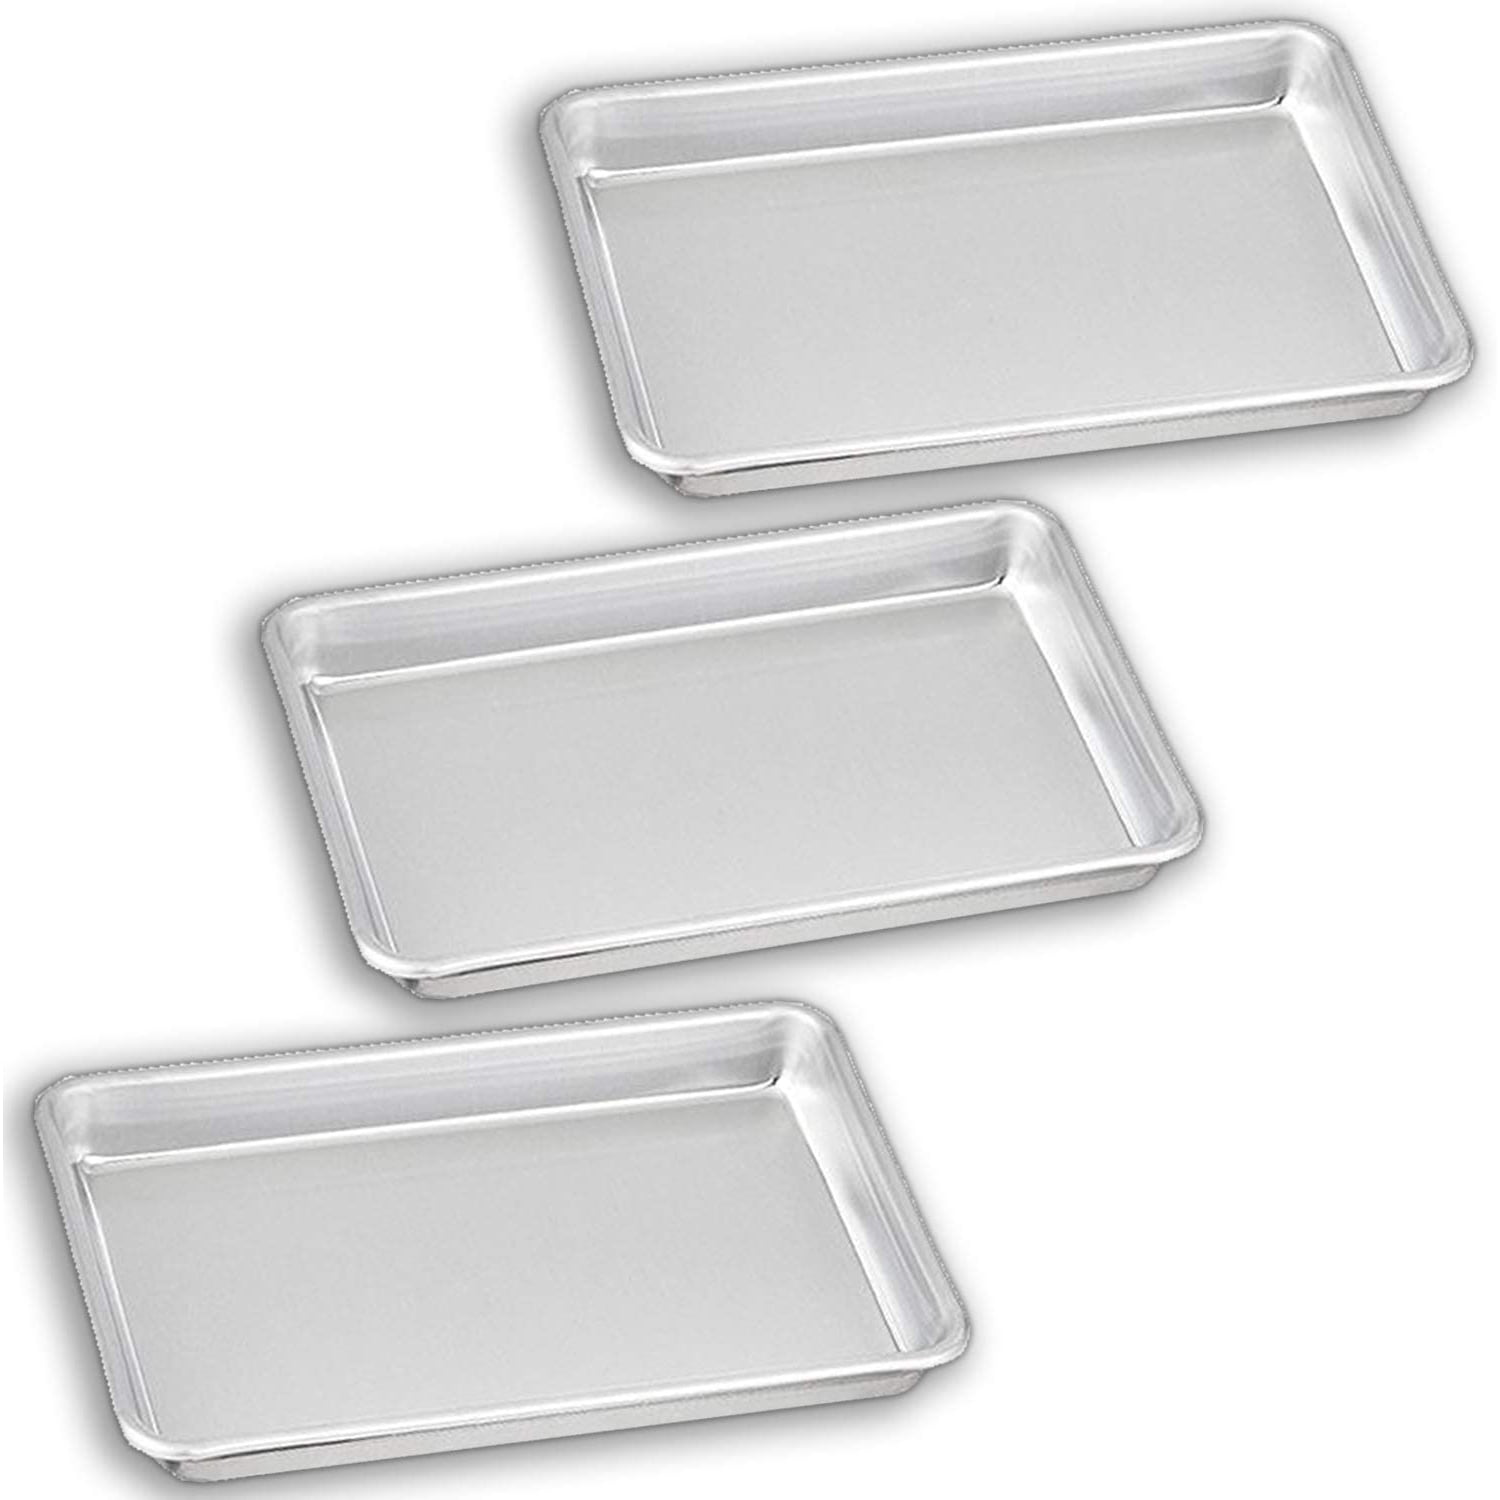 Bakeware Set – 3 Aluminum Sheet Pan – 1/8 Size (6.5 x 9.5) – for Home  Use. Perfect Size For Your Microwave Oven, Non Toxic, Perfect Baking Supply